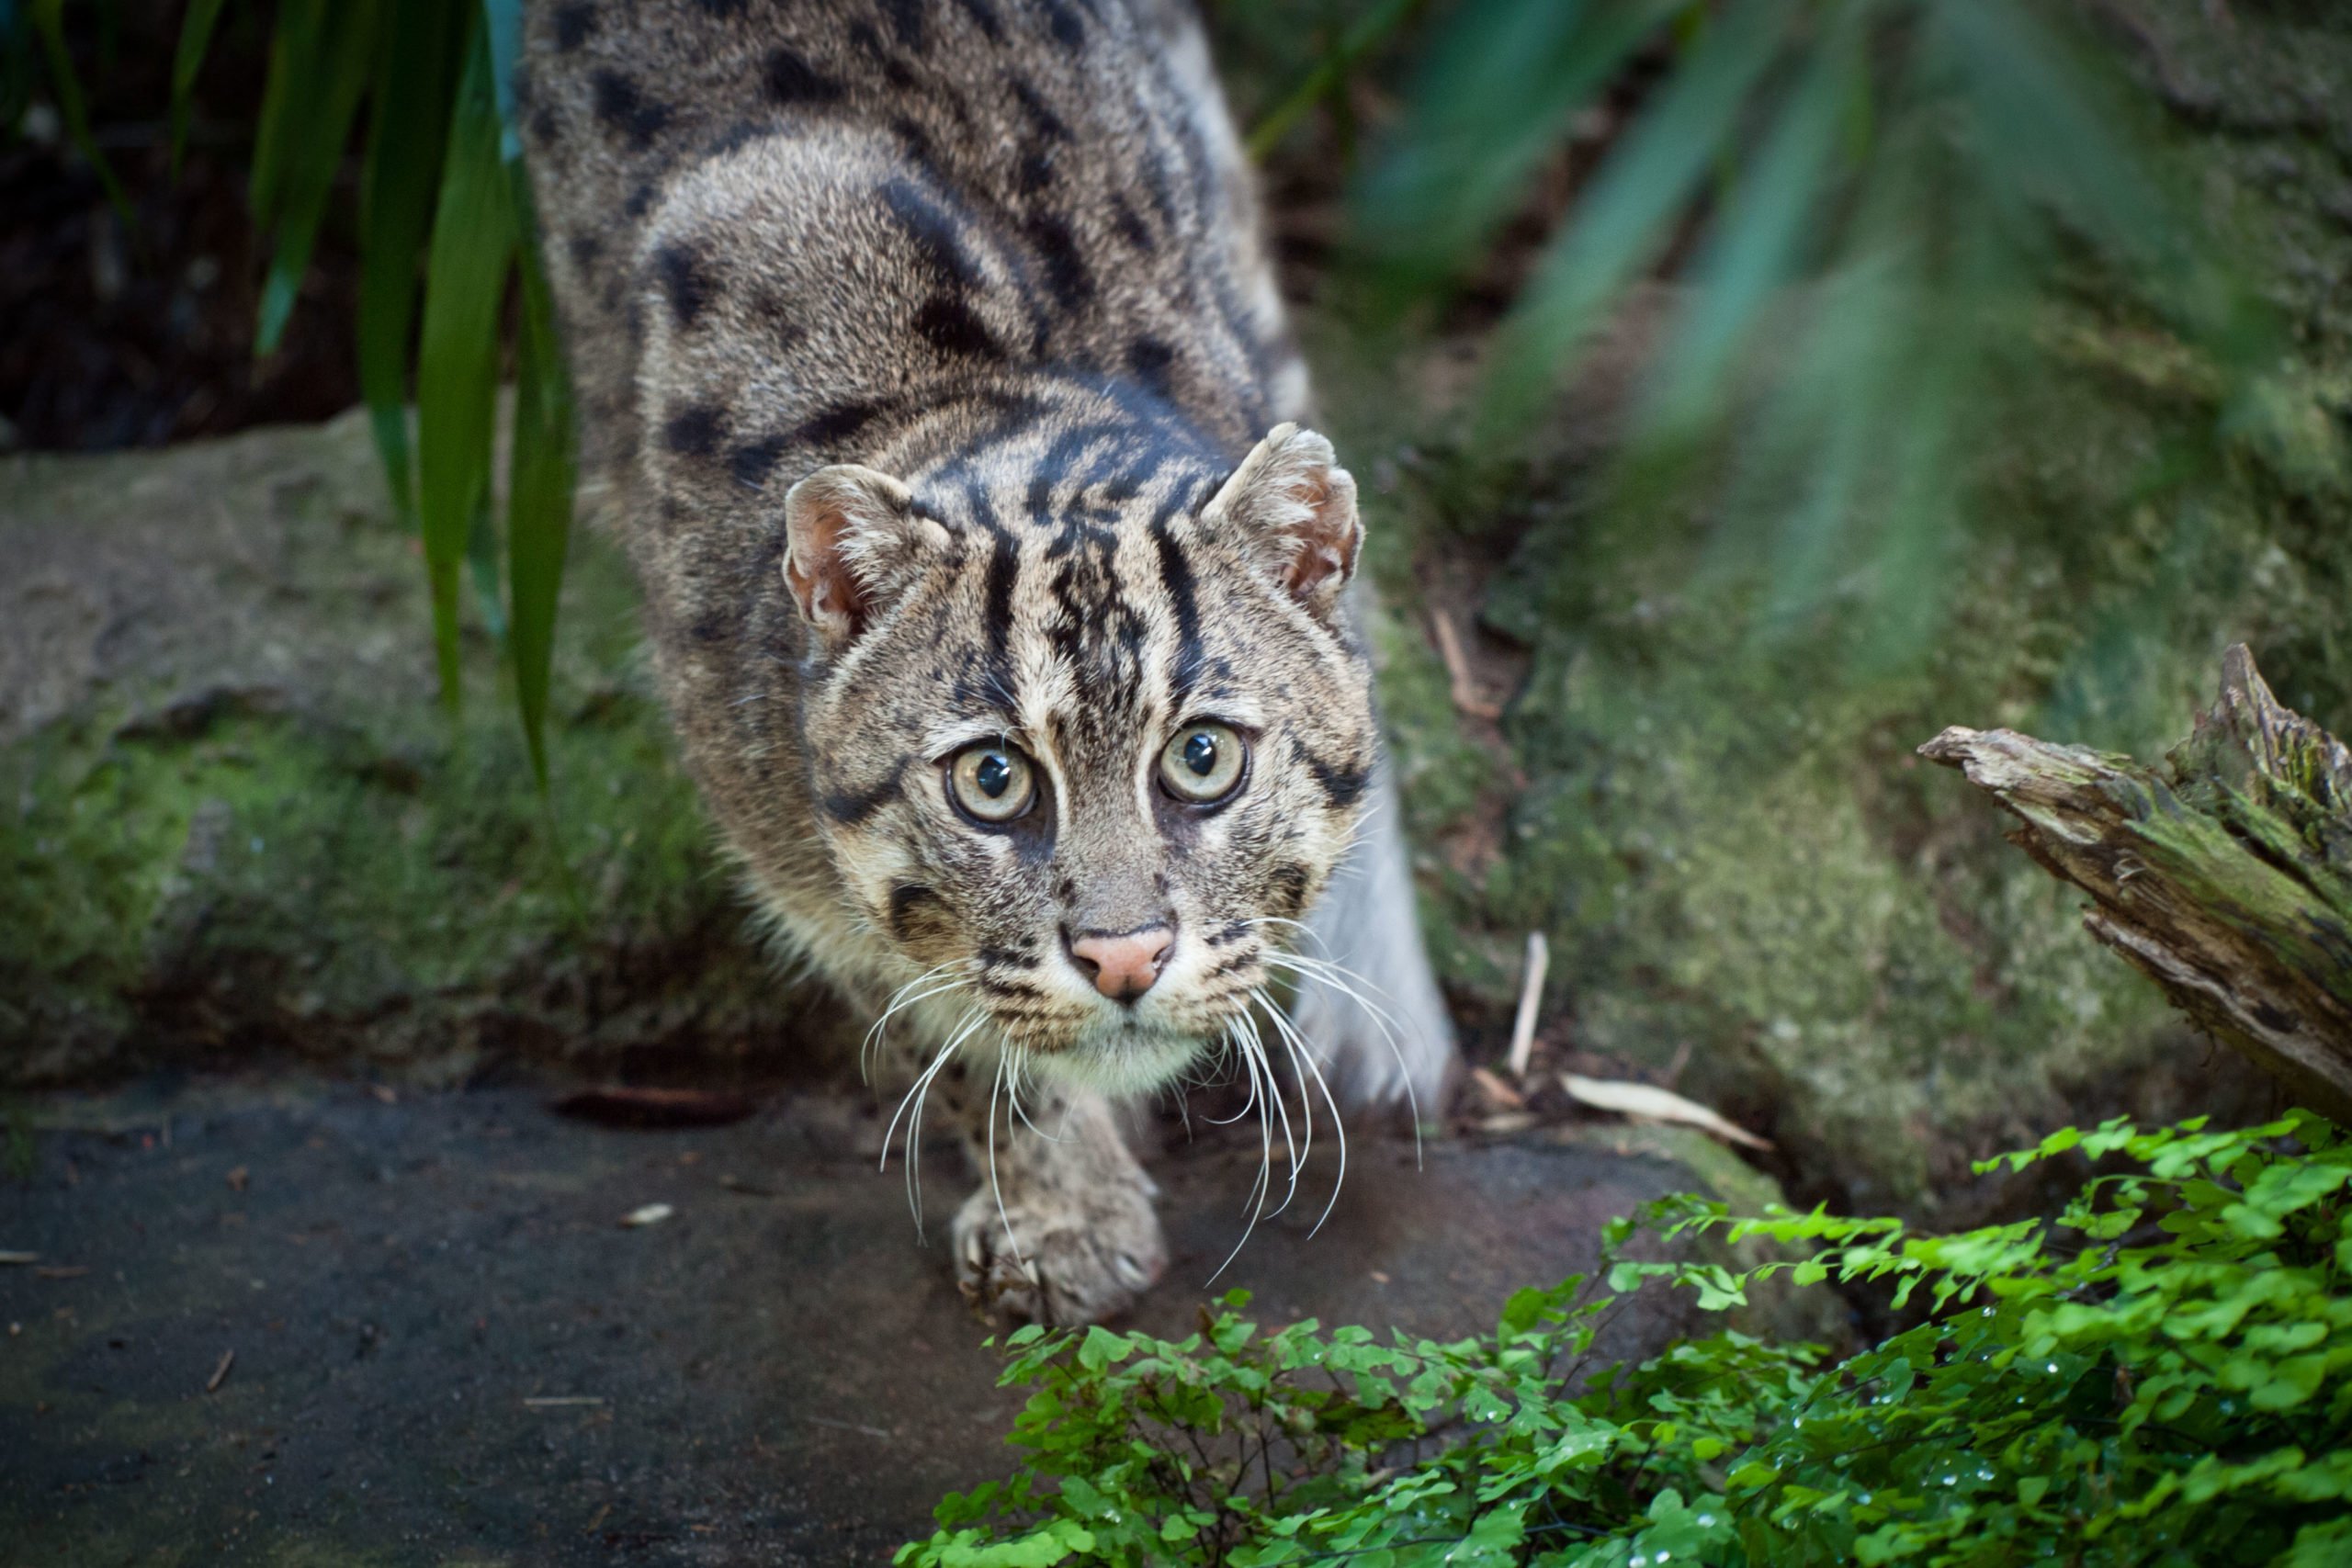 WBBSE Notes For Class 8 General Science And Environment Chapter 10 Biodiversity Environmental Crisis And Conservation Of Endangered Animals Fishing cat